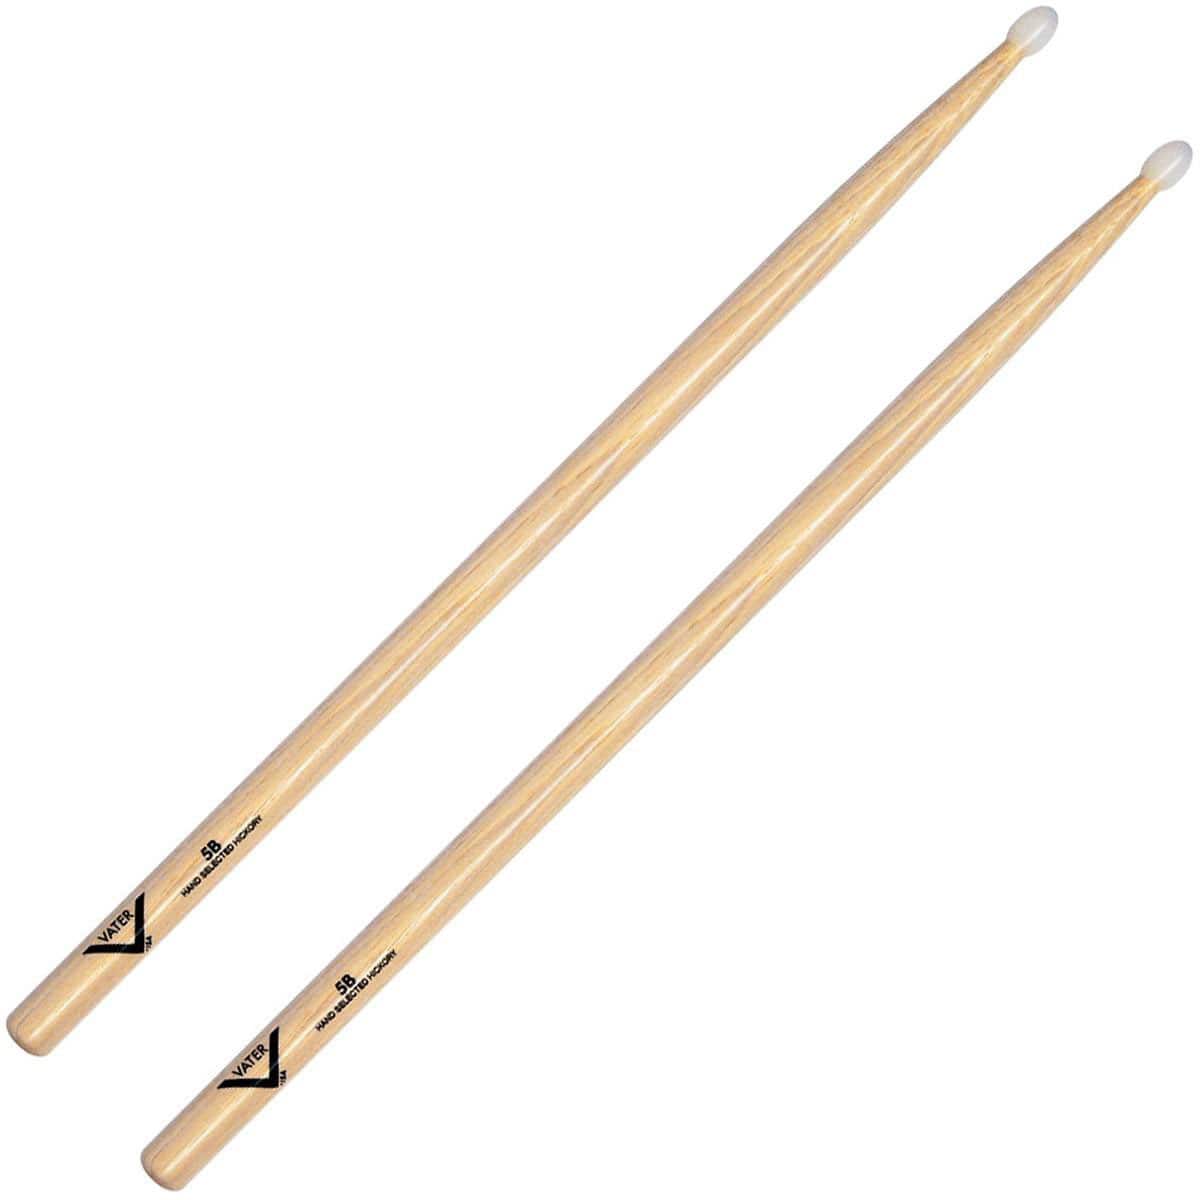 Vater Hickory 5B Nylon Tip Drum Sticks Drums and Percussion / Parts and Accessories / Drum Sticks and Mallets